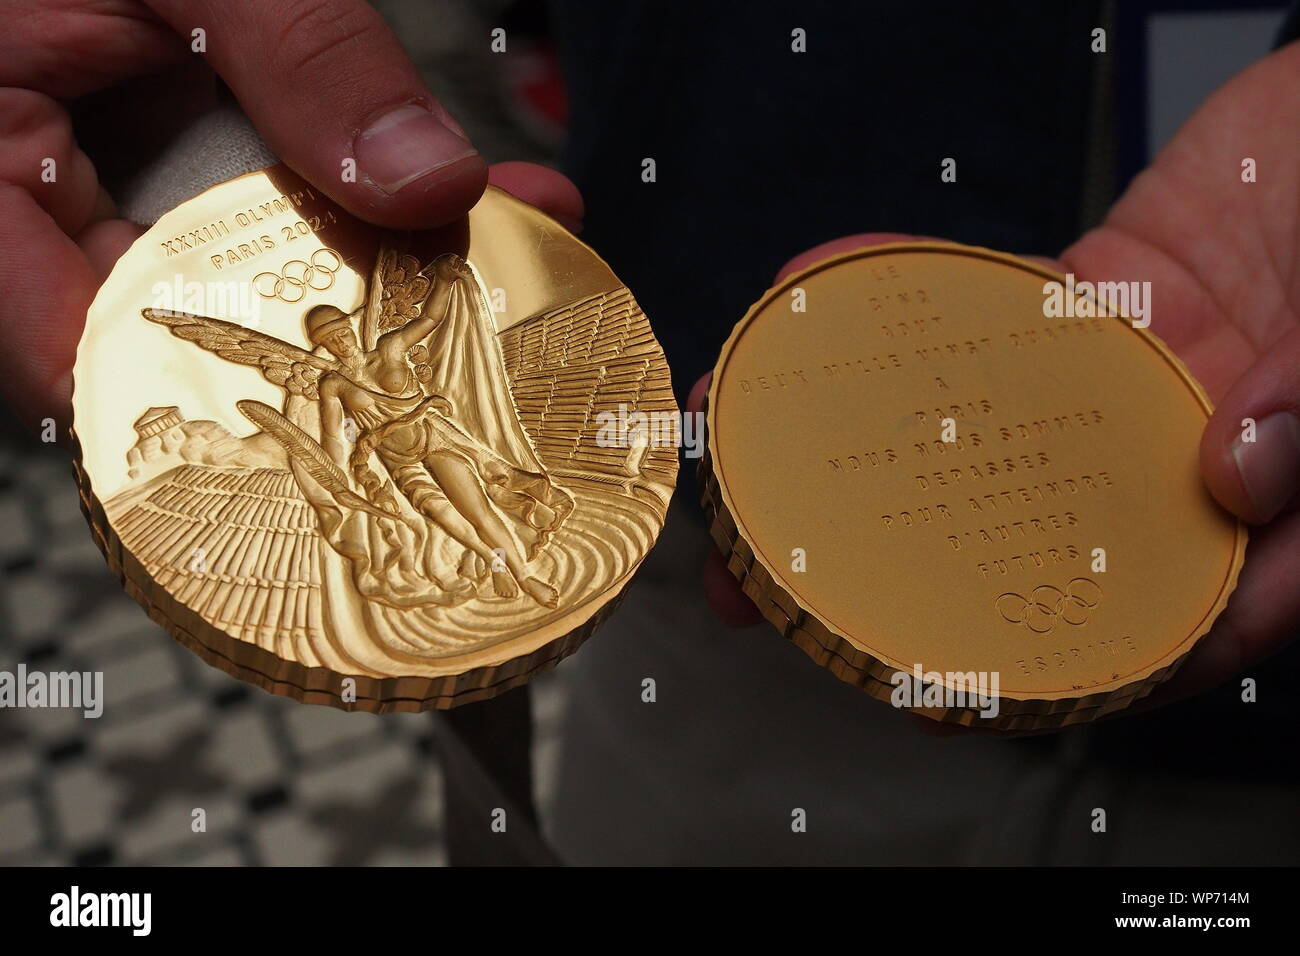 Paris 2024 Olympic Medals Breakdancing In The Olympics Paris 2024